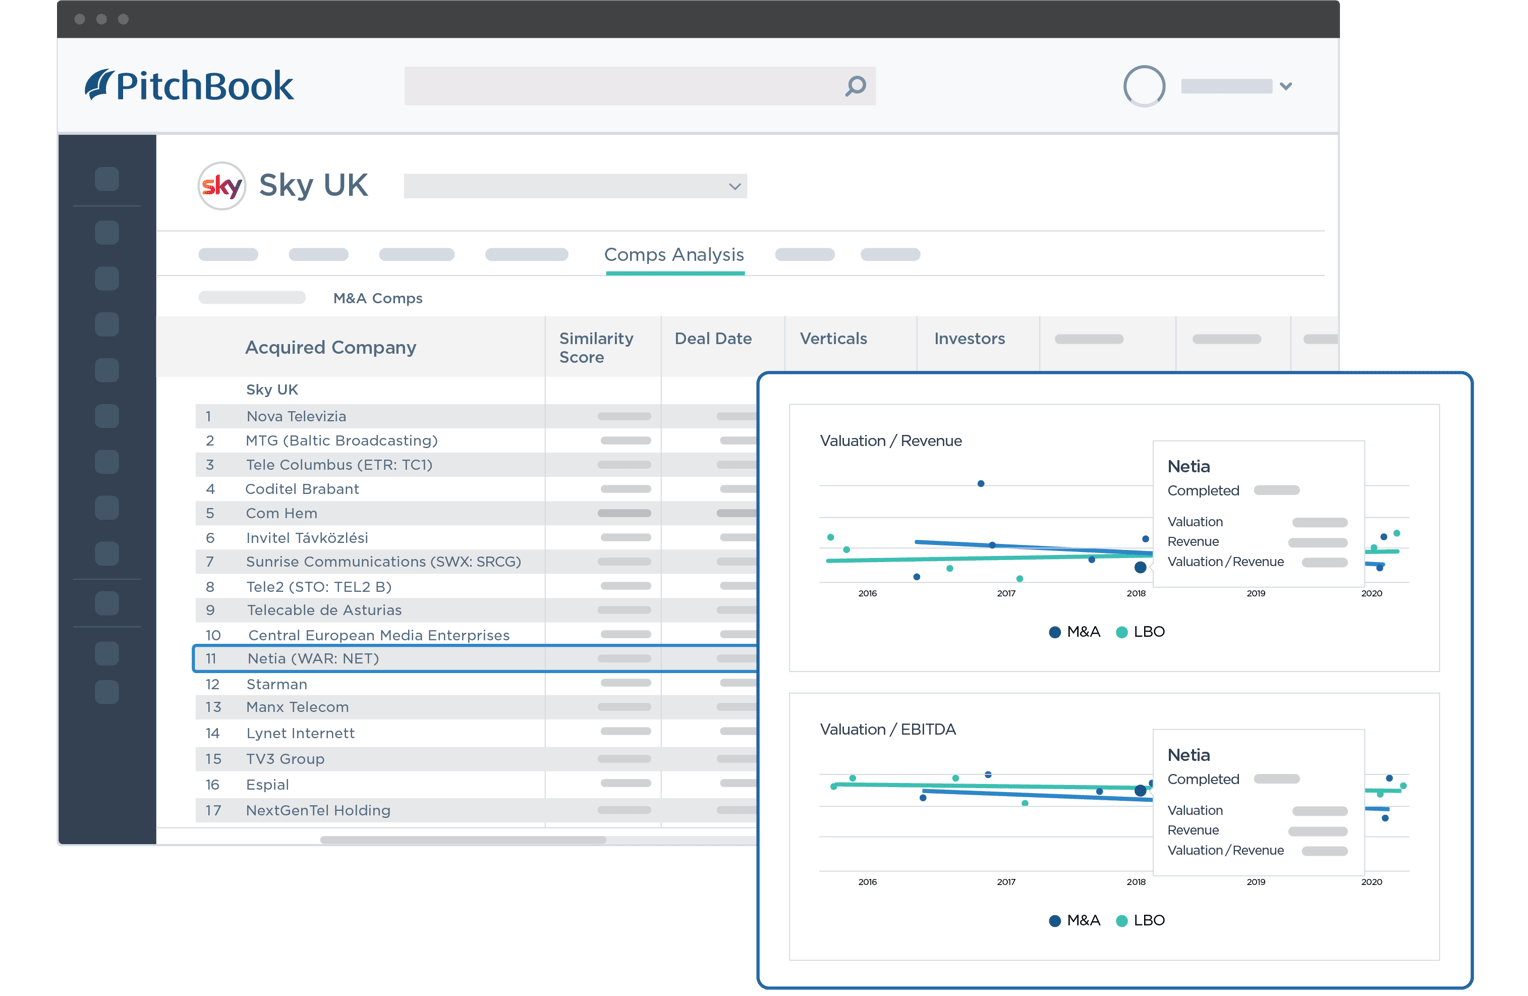 PitchBook data showing Sky UK’s M&A comps analysis with highlight on Netia’s valuation/revenue and valuation/EBITDA.